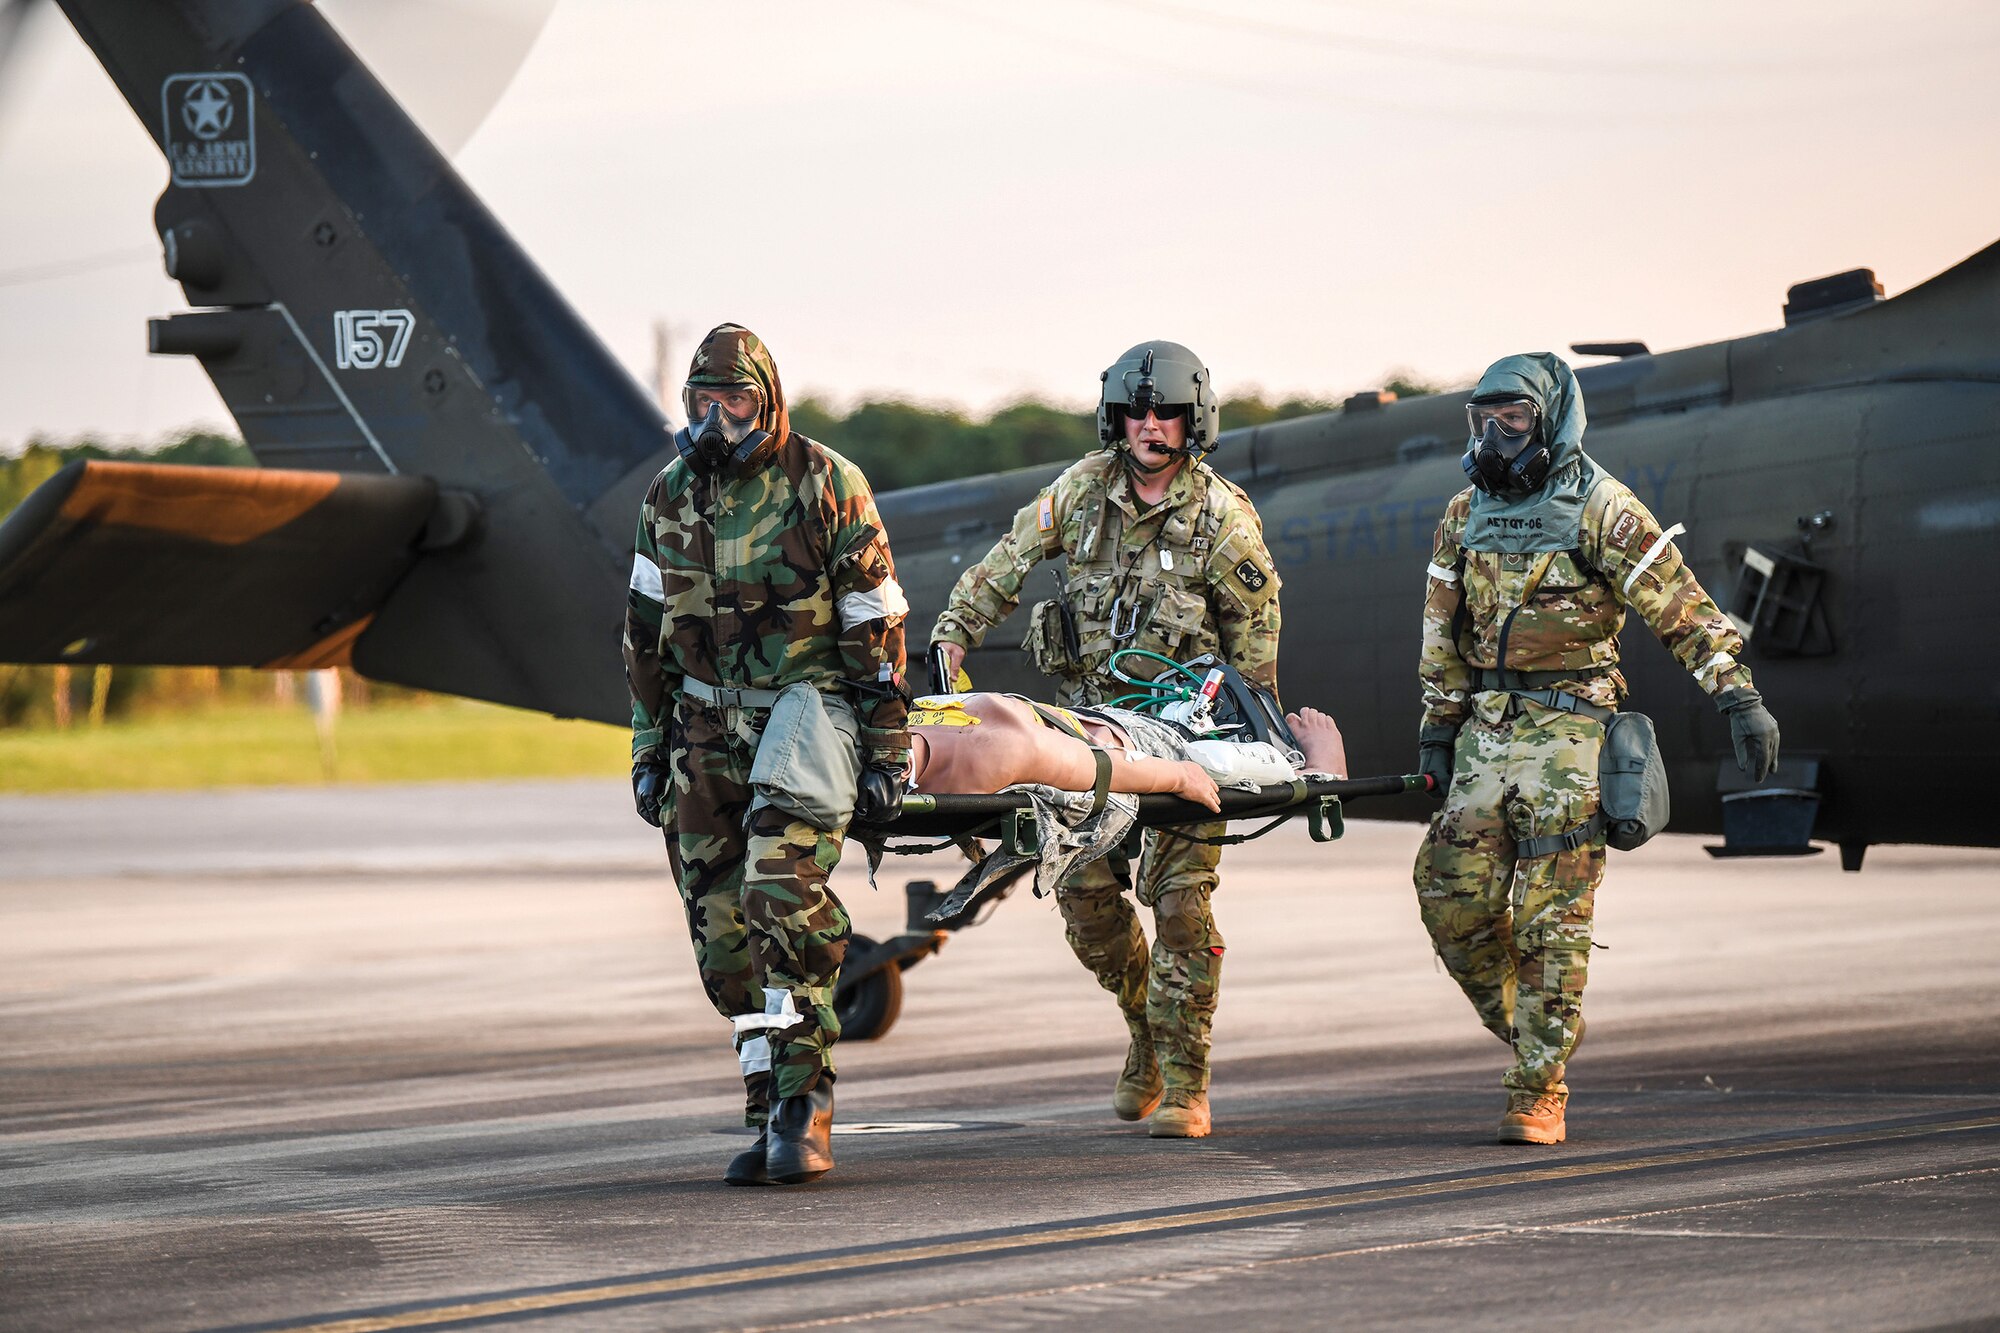 (from left to right) Second Lt. Kiley Gerritsen), 445th Aeromedical Staging Squadron critical care air transport team member, Army Spc. Scott Hillman, 159th Regiment General Support Aviation Battalion flight medic, Fort Knox, and Staff Sgt. Trey Naber, 445th Aeromedical Evacuation Squadron AE technician, carry a litter from an HH-60 Pave Hawk helicopter on a Fort Campbell, Kentucky flightline, Sept. 13, 2022.